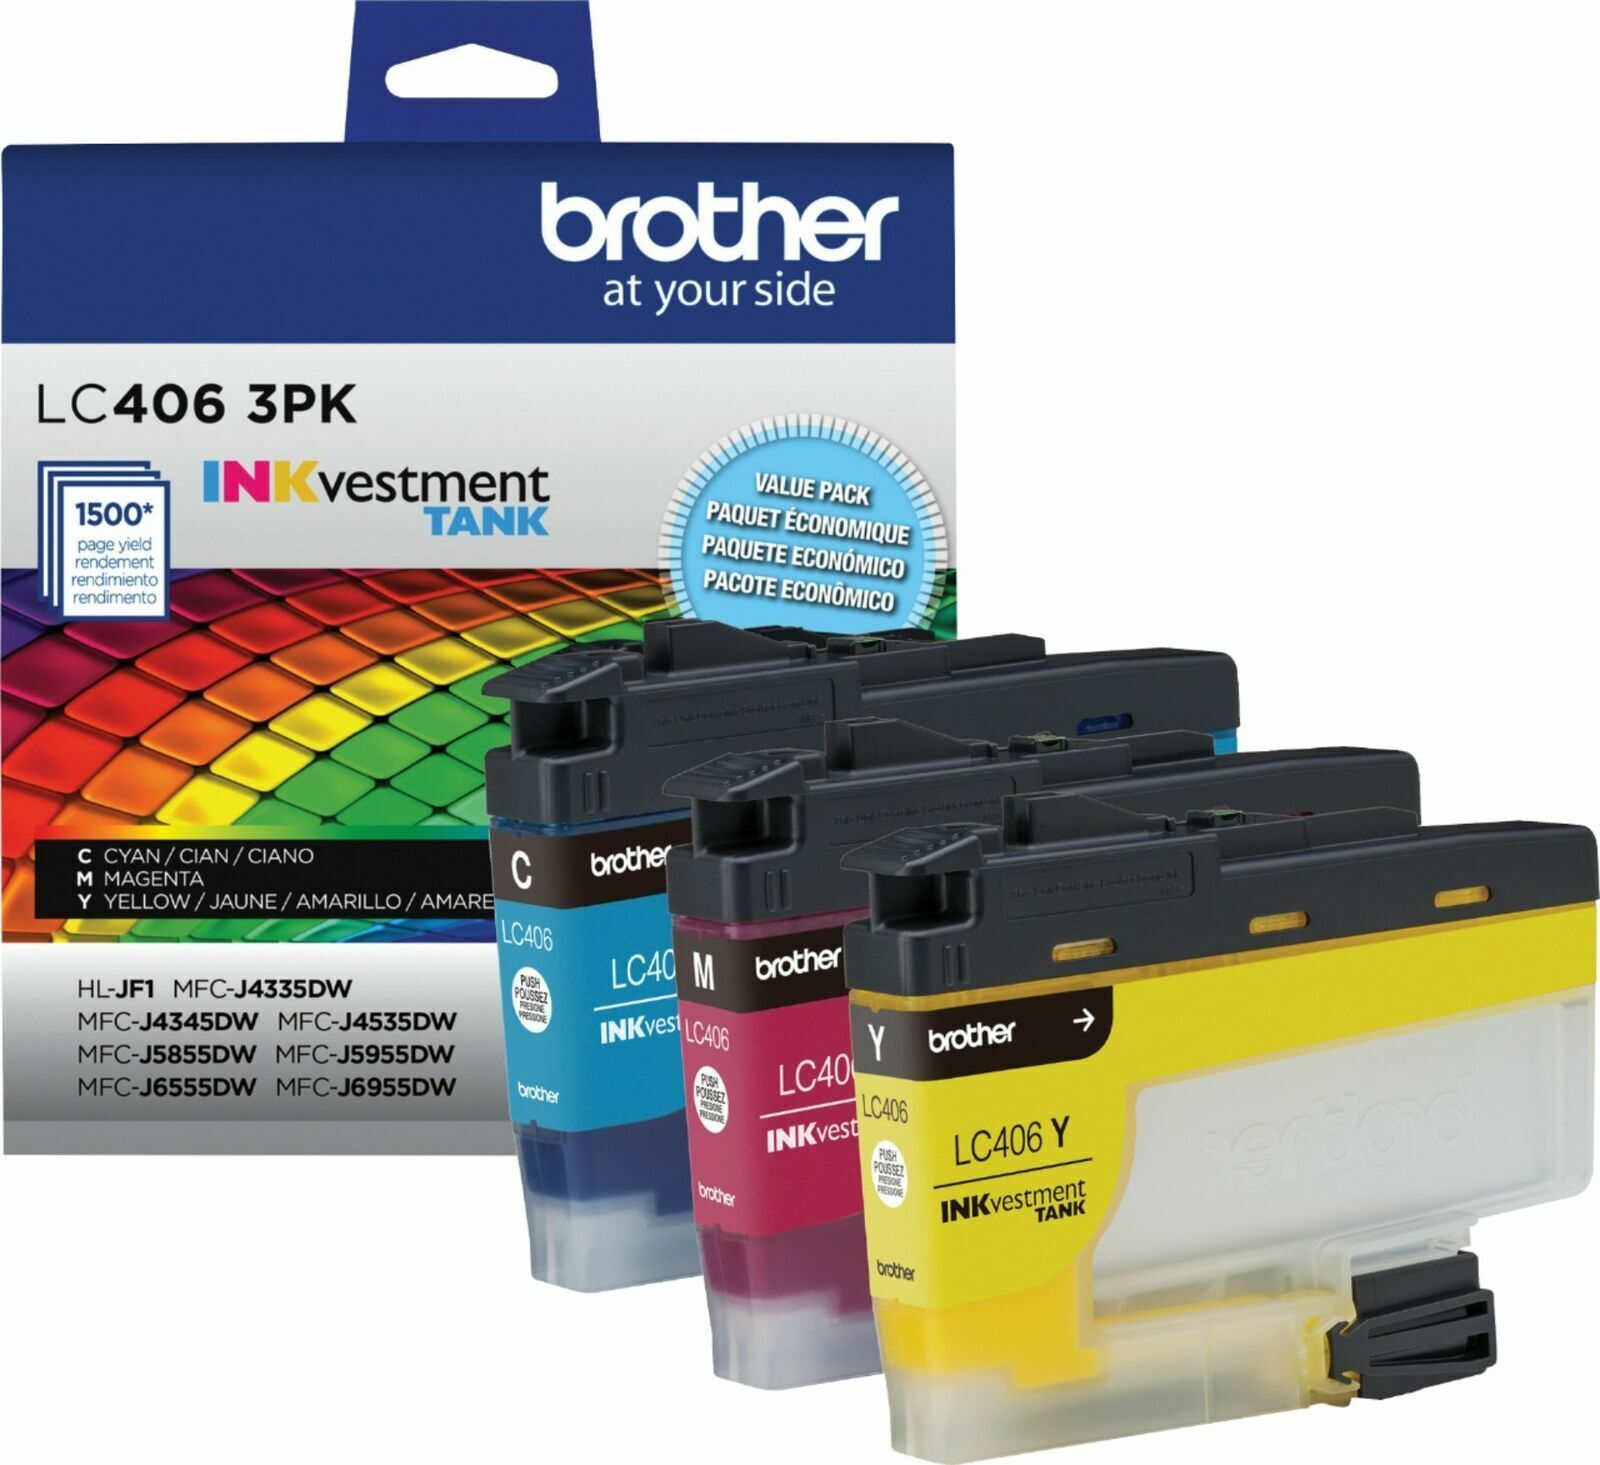 Genuine Brother - LC406 3PK 3-Pack INKvestment Tank Ink Cartridges - Multi